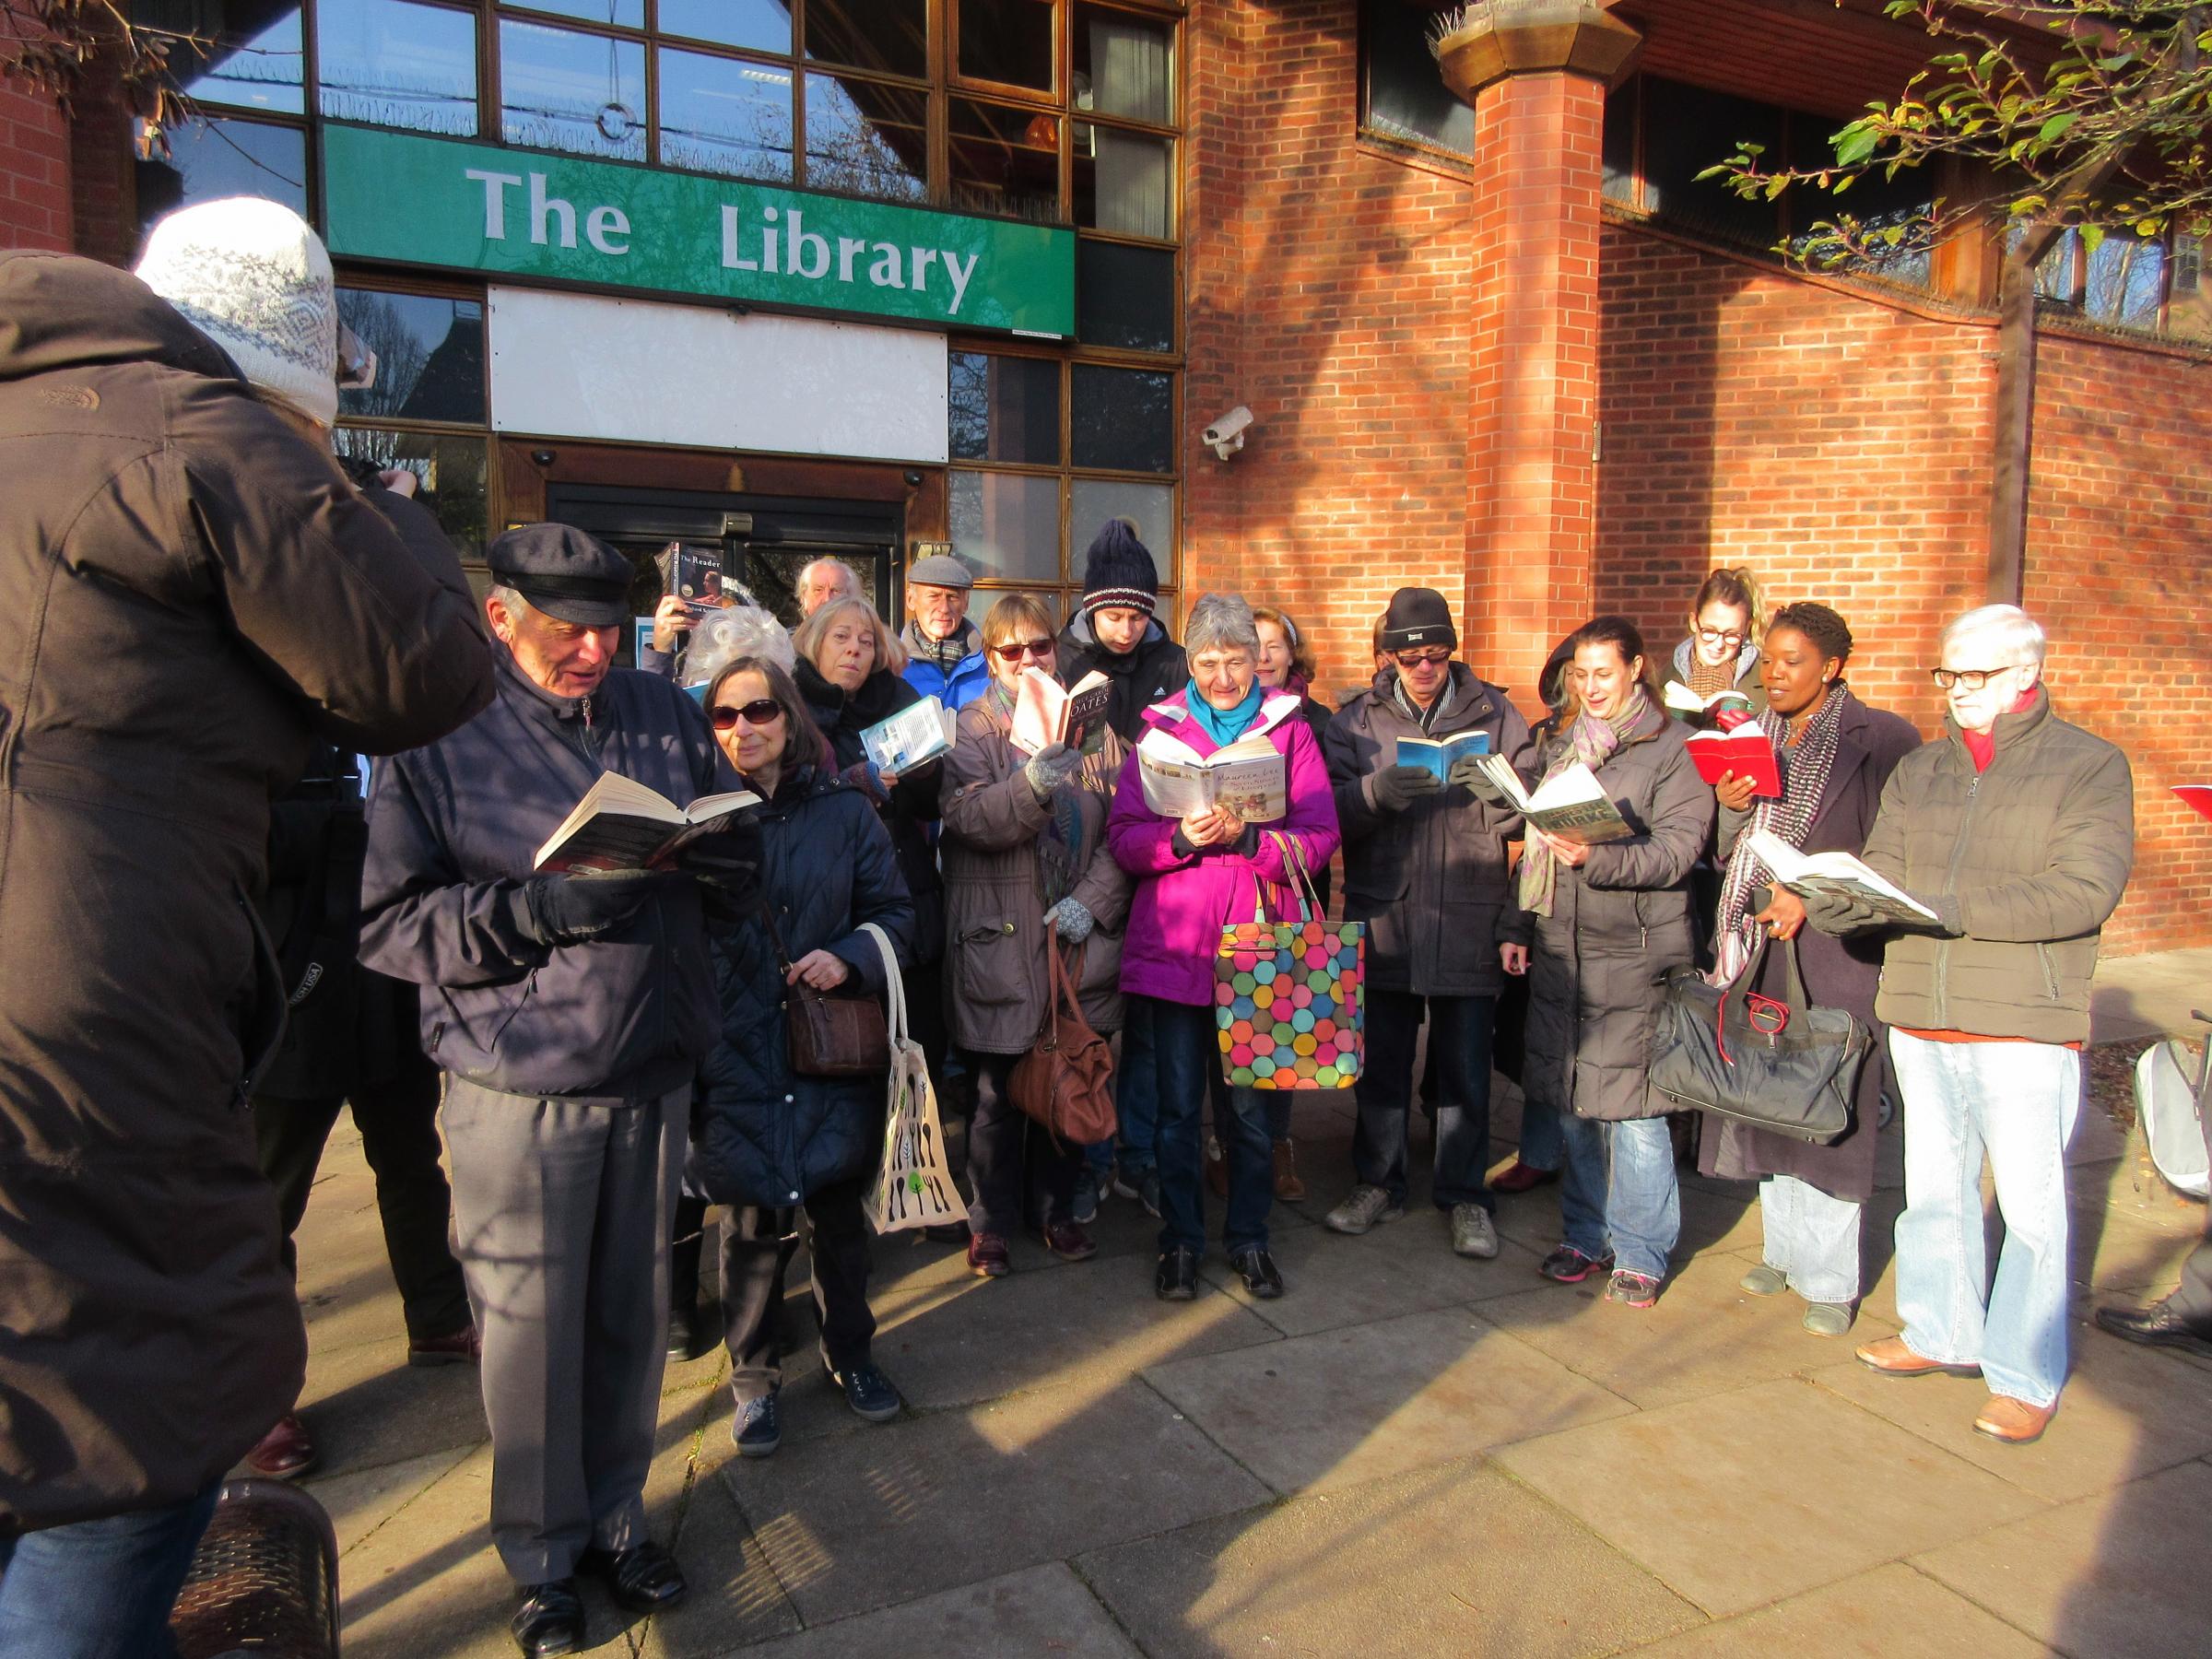 'There is a crying need for libraries': Protestors stage 'read-in' to save library - Times Series